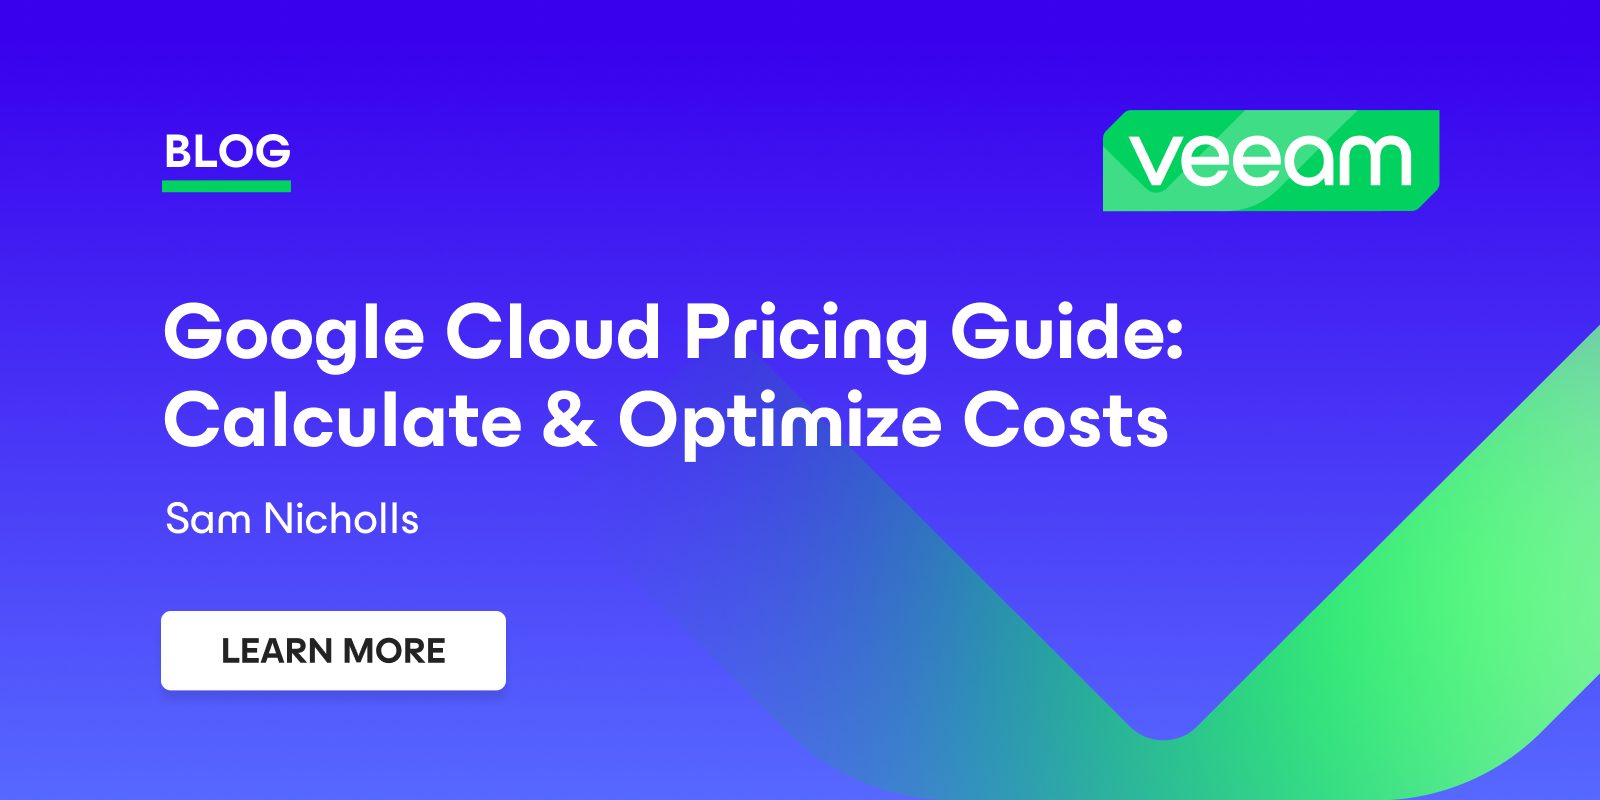 Google Cloud Pricing Guide: Calculate & Optimize Costs